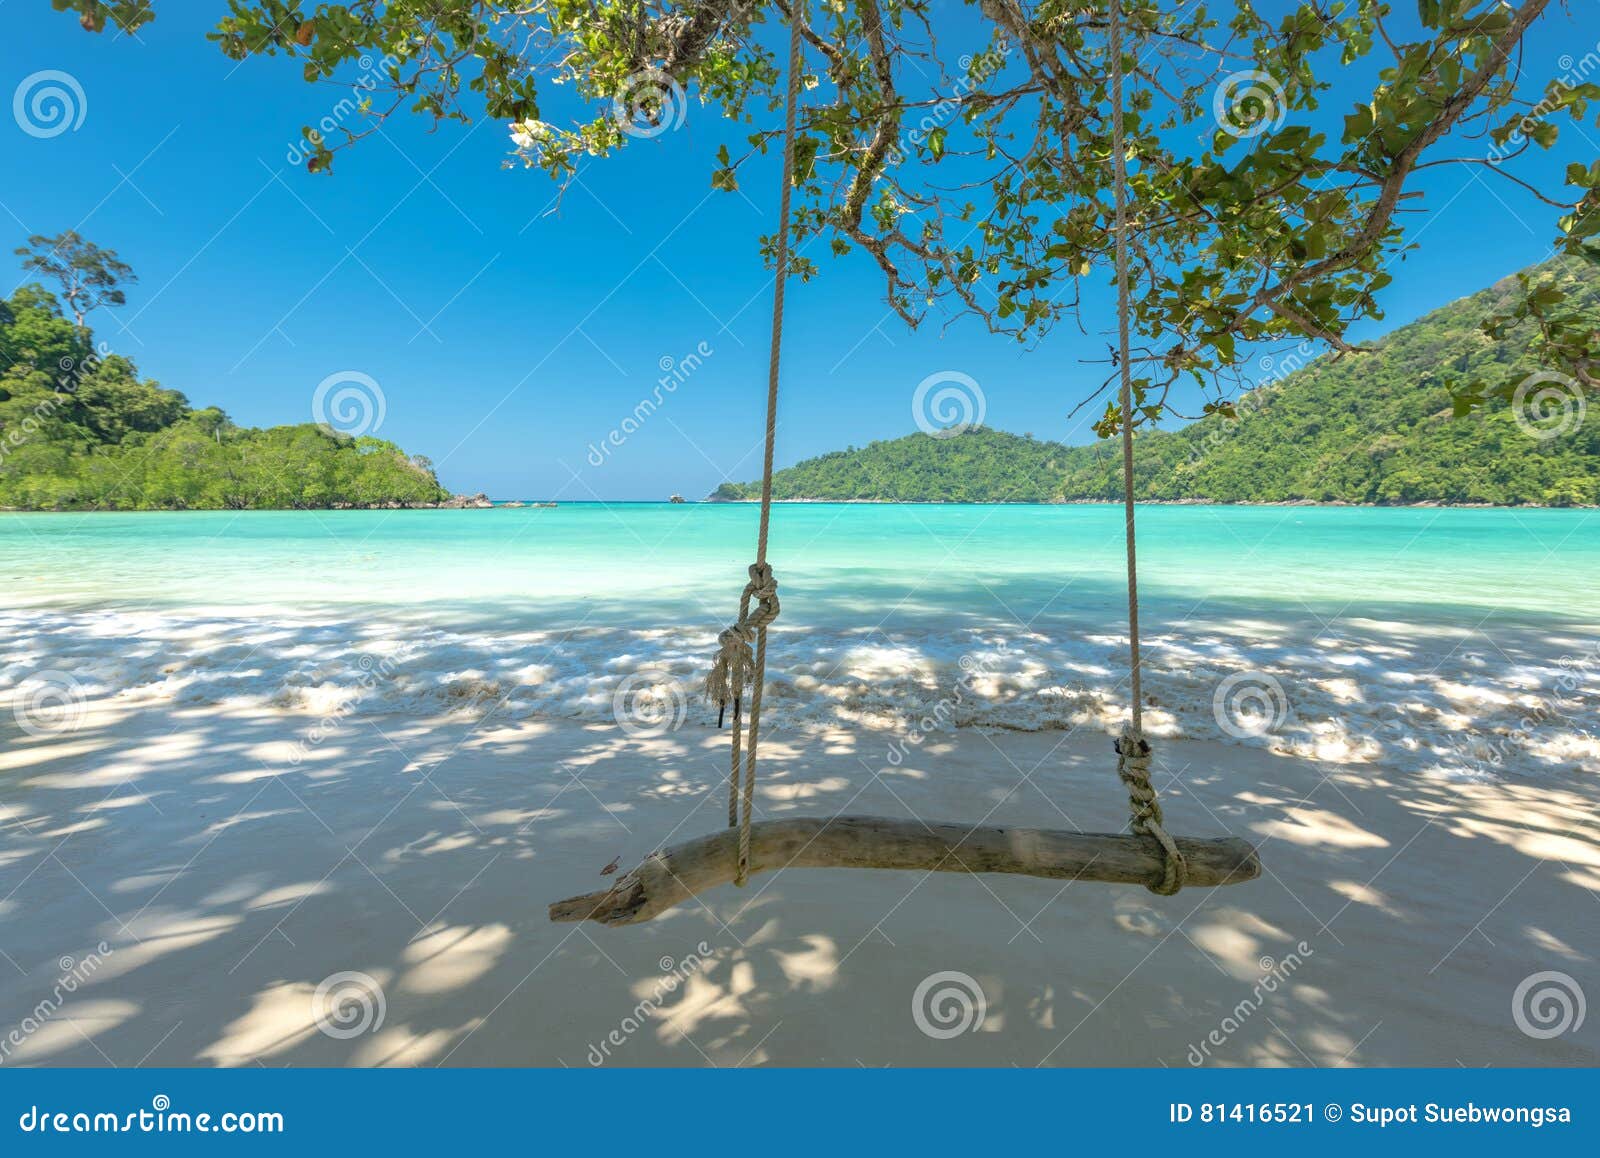 swing and beautiful beach for relaxation, located surin island,